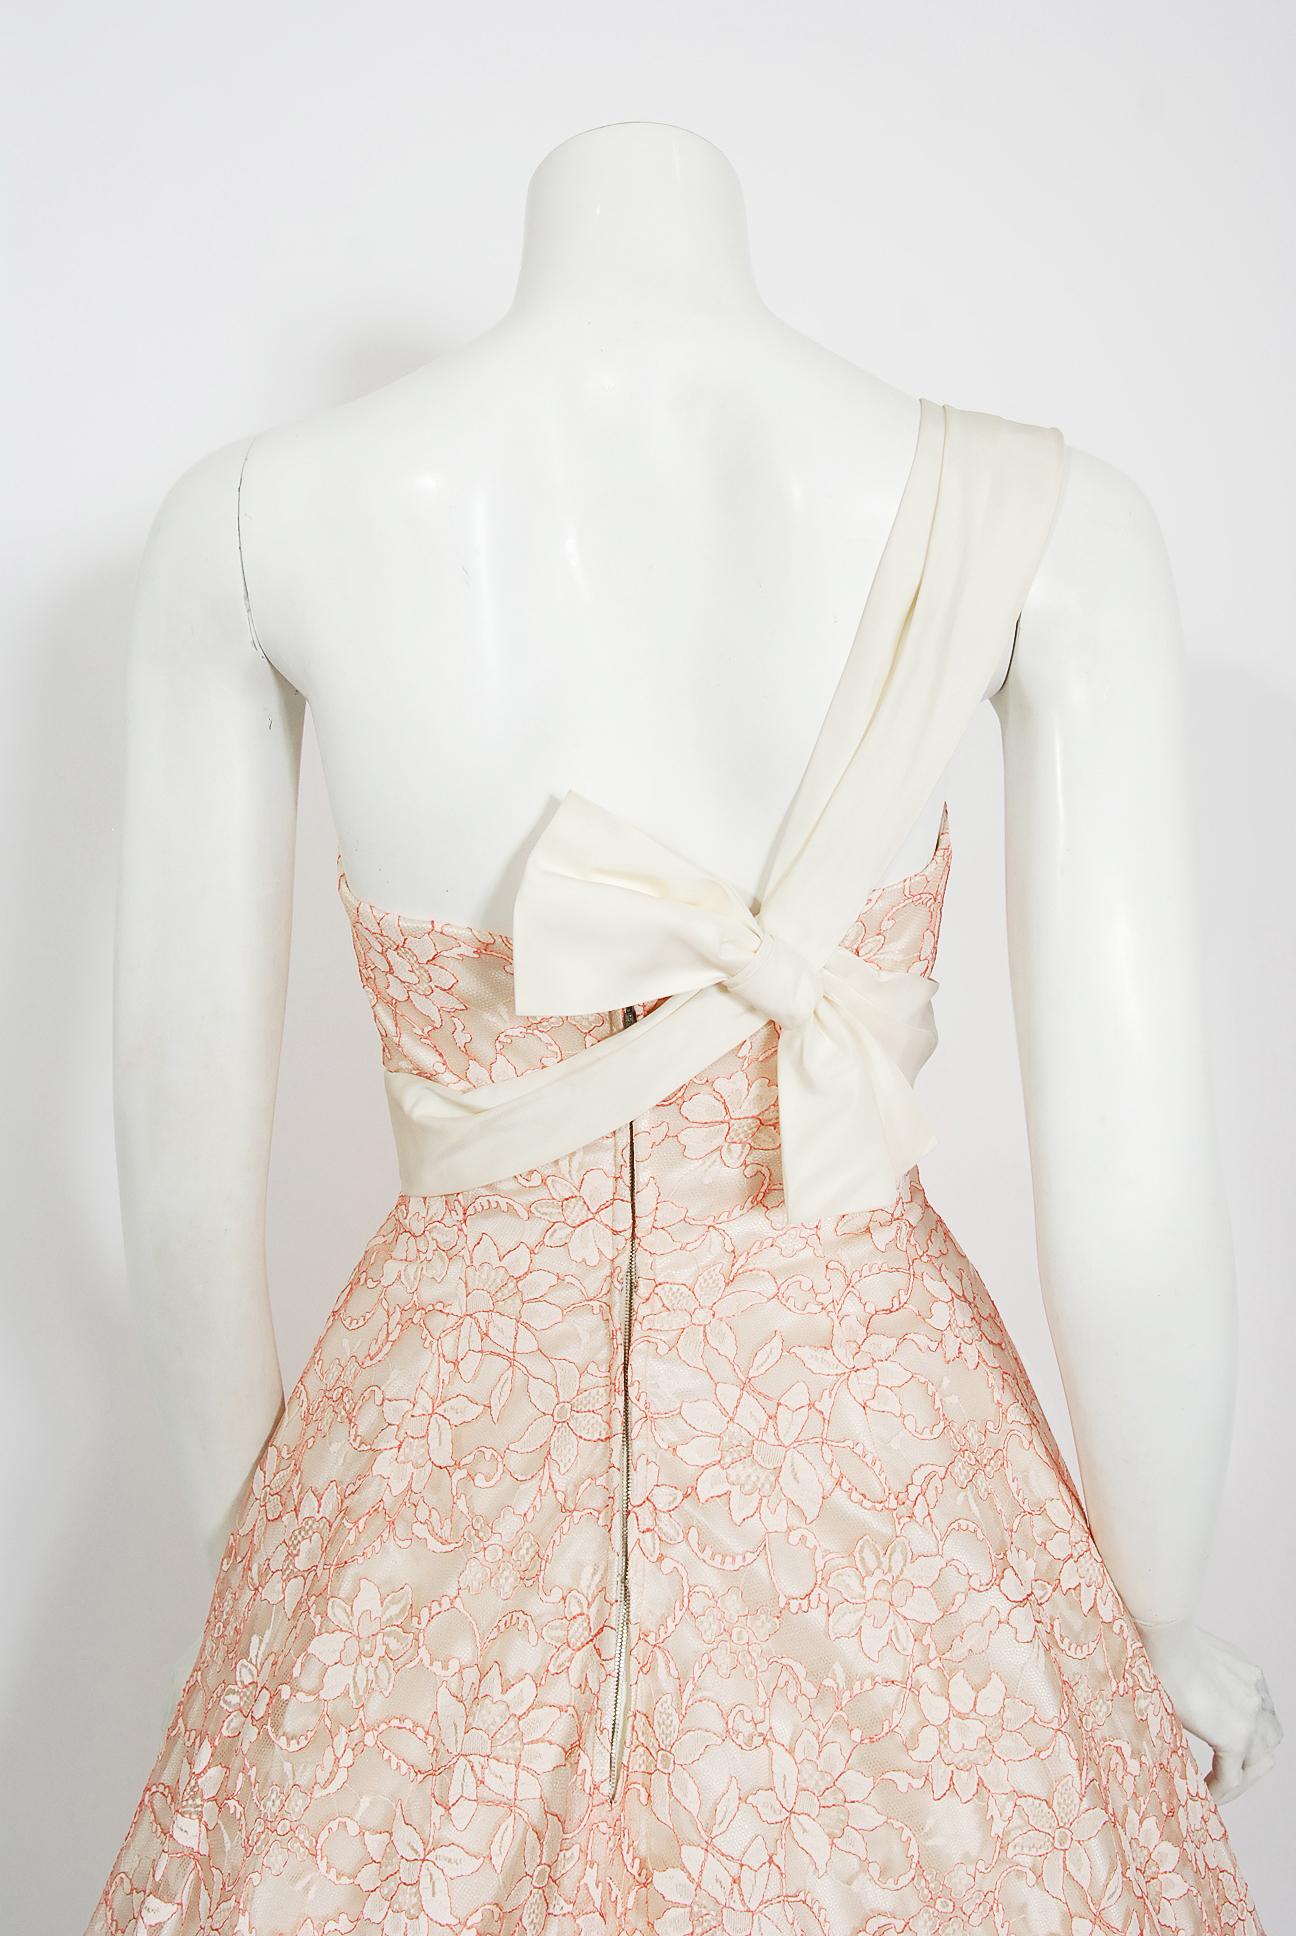 Vintage 1950's Jacques Heim Haute Couture Pink and White Lace One-Shoulder Dress 5